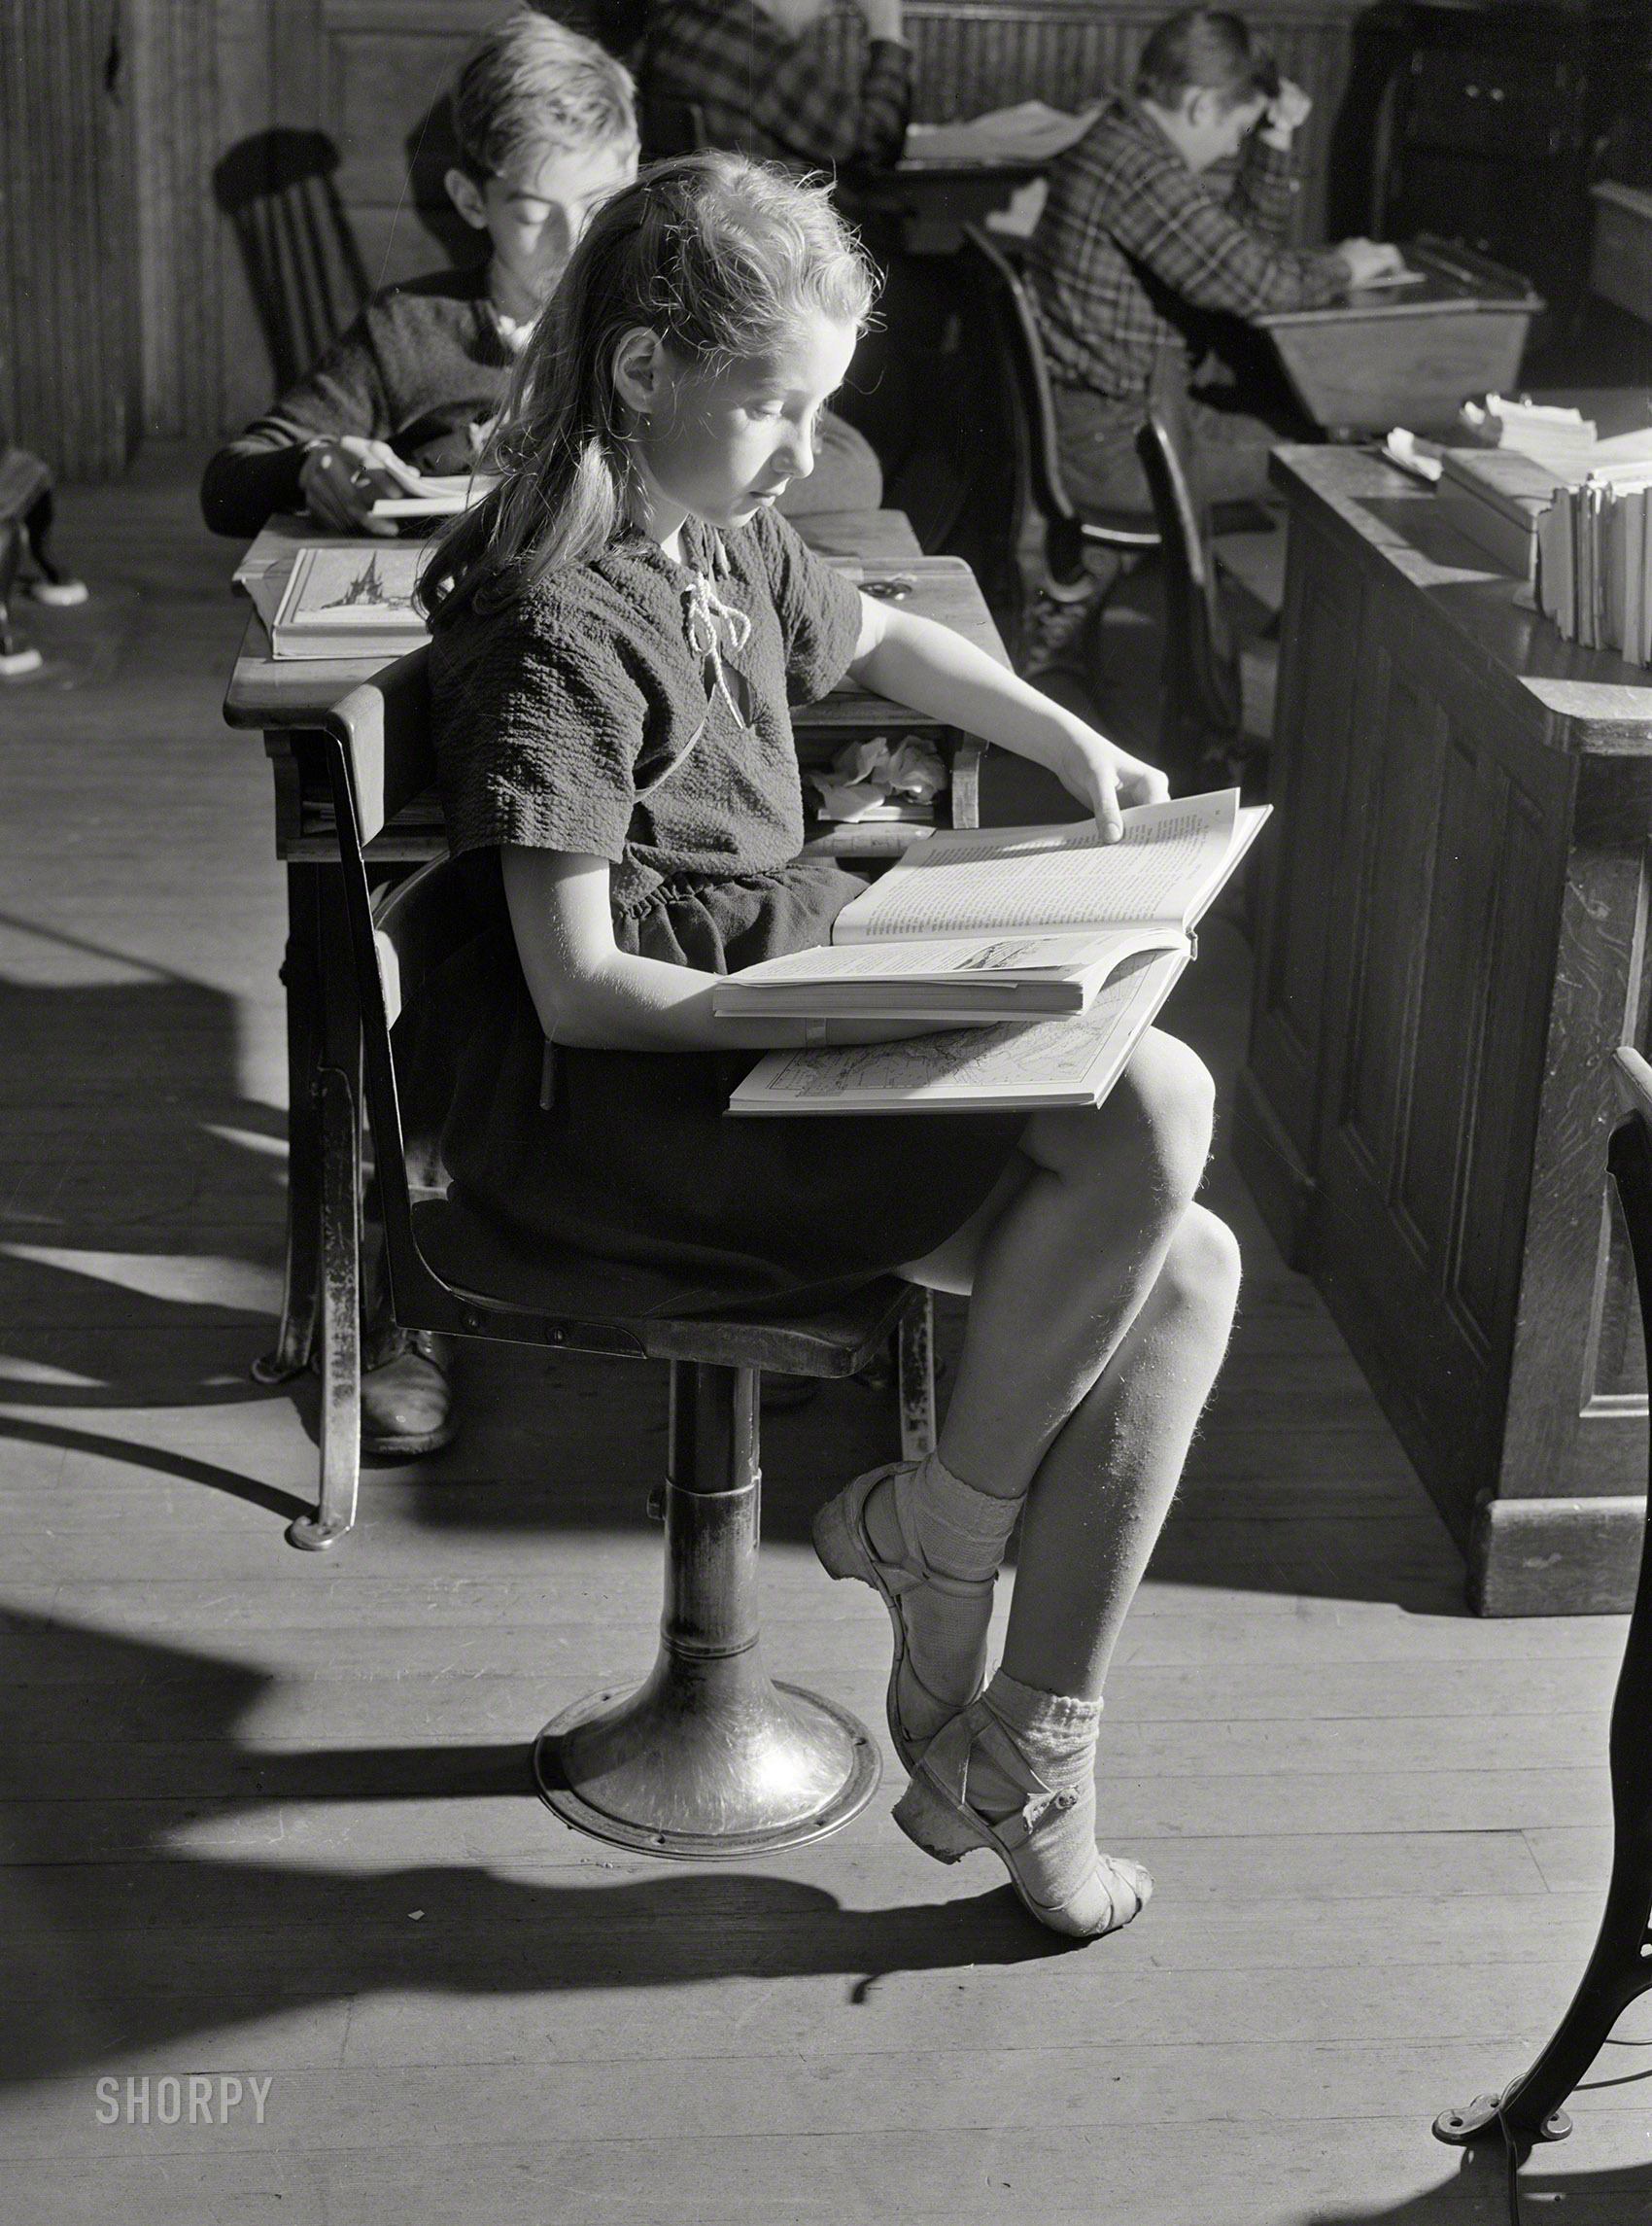 November 1940. "Children of farmers in the town of Ledyard, Connecticut, in one of the one-room schoolhouses." Acetate negative by Jack Delano. View full size.